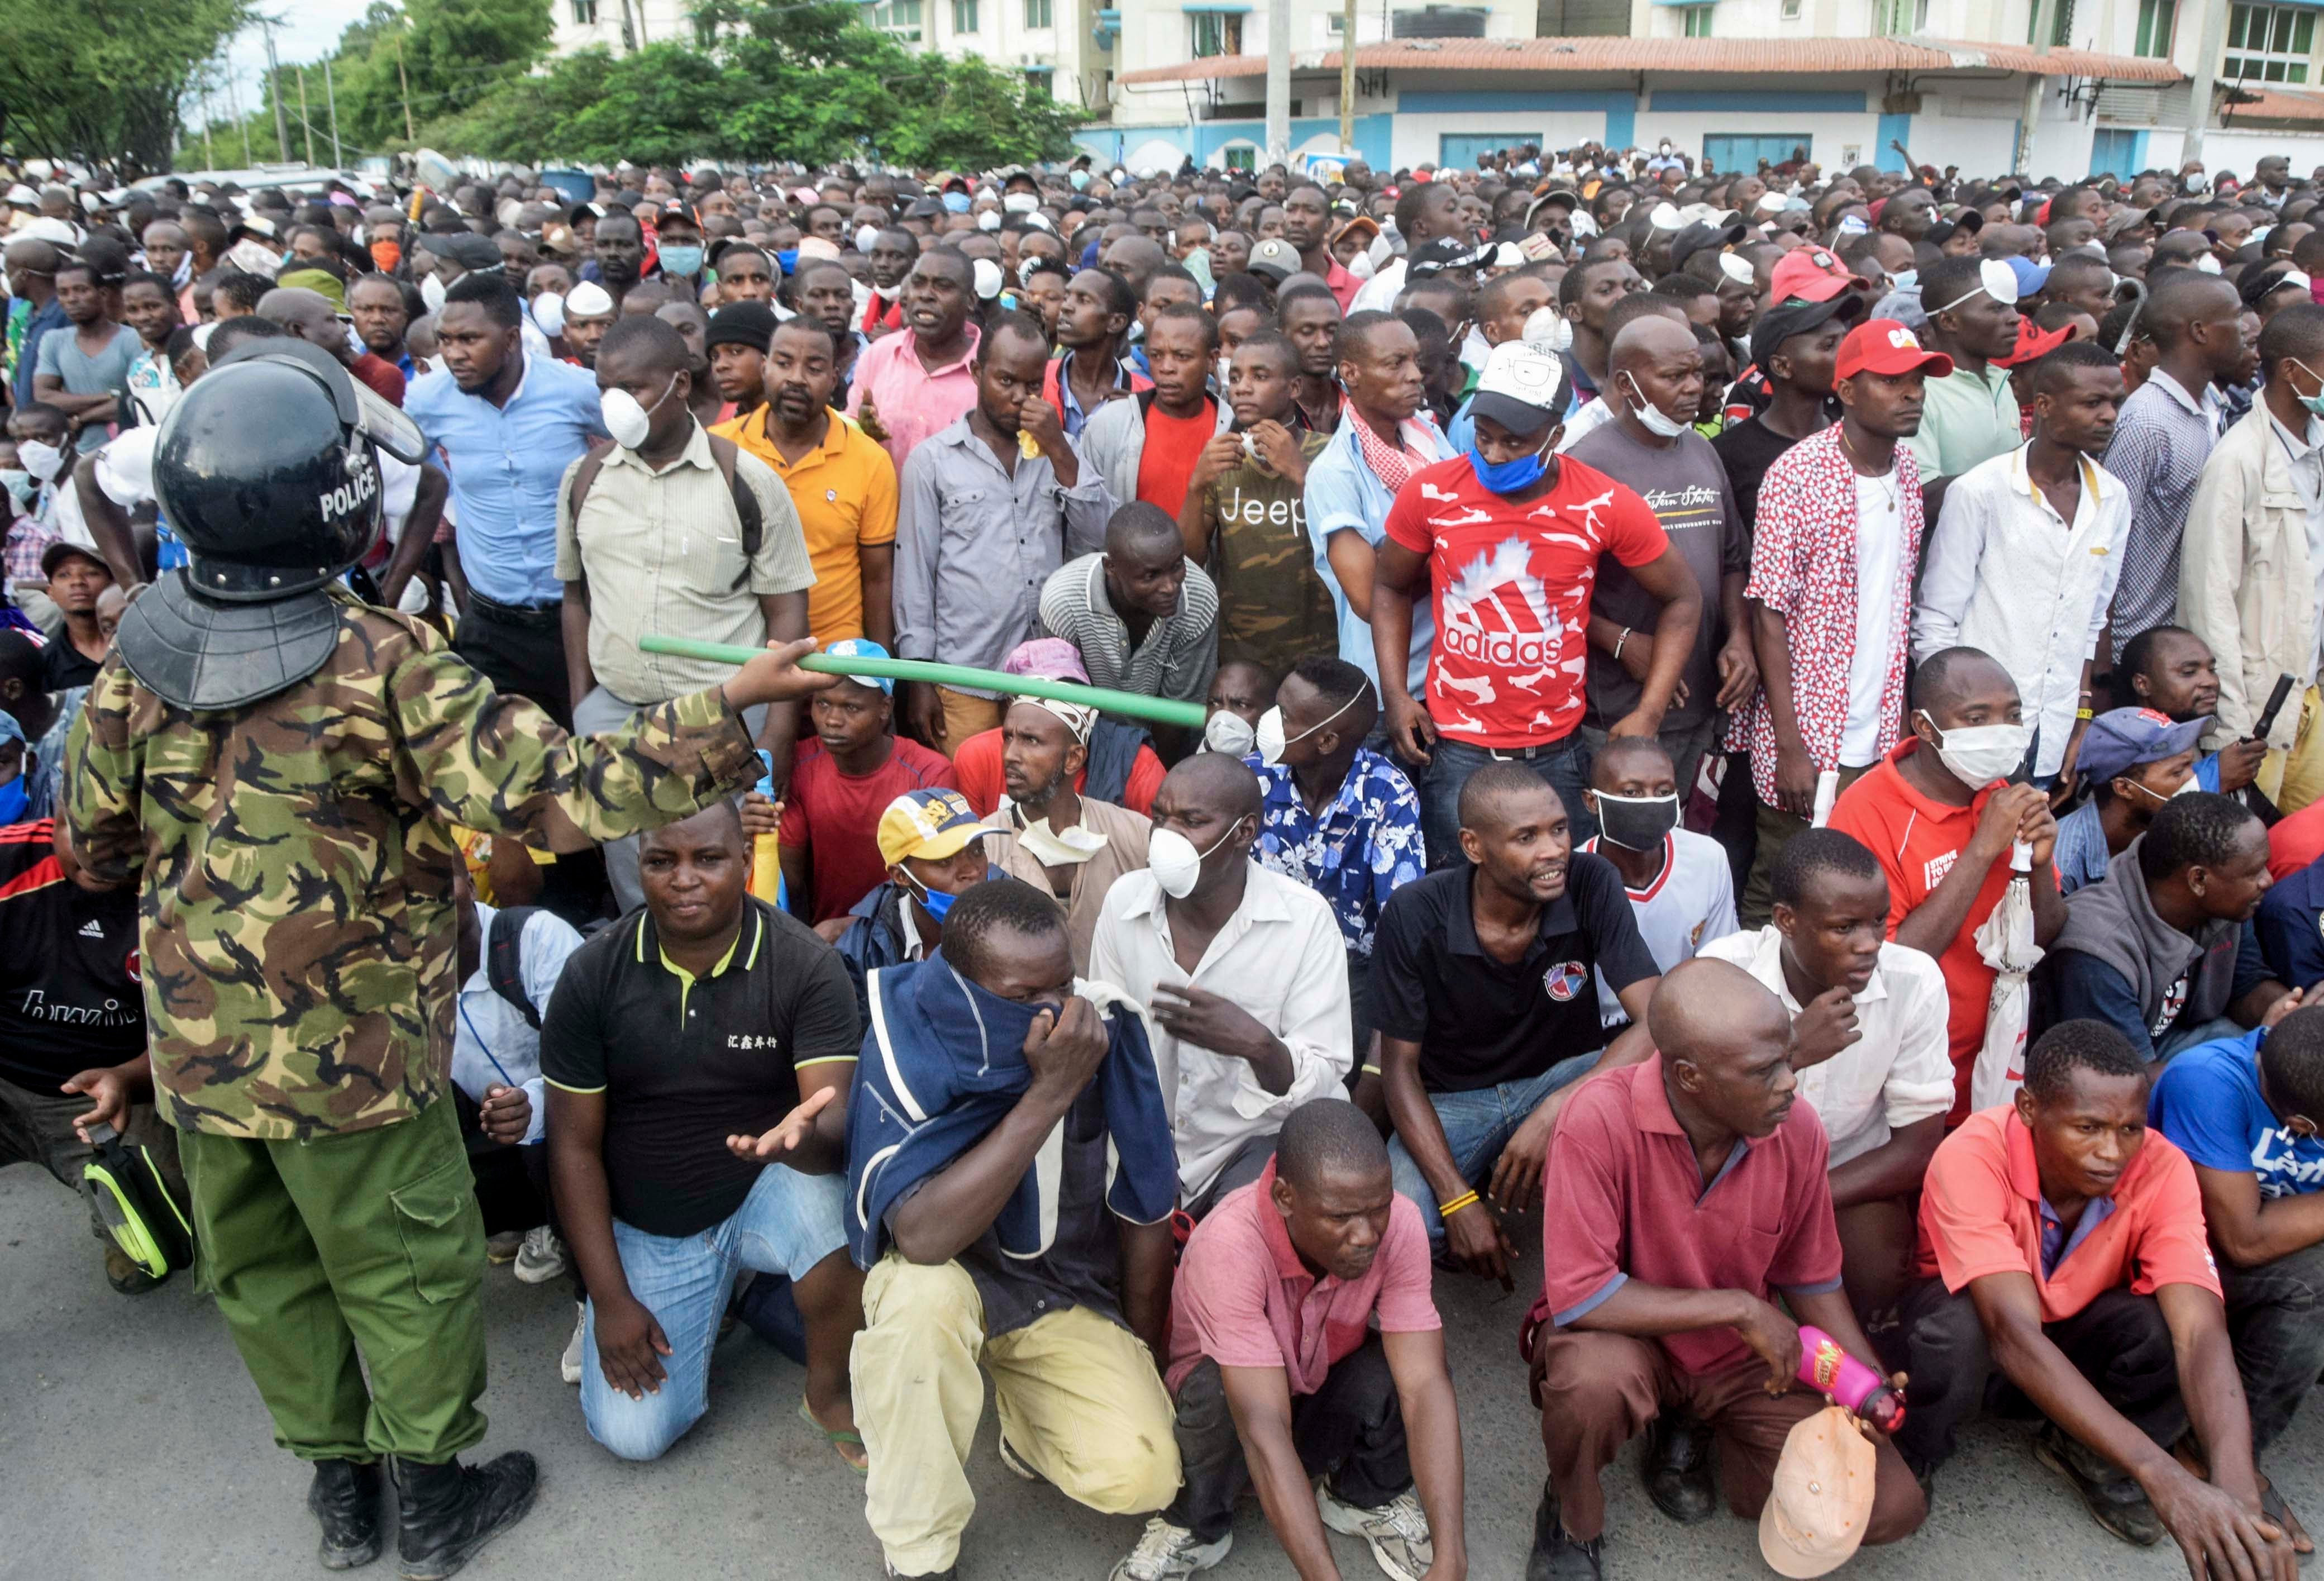 Kenyan police hold back ferry passengers causing a crowd to form outside the ferry in Mombasa, Kenya on Friday, March 27, 2020. 